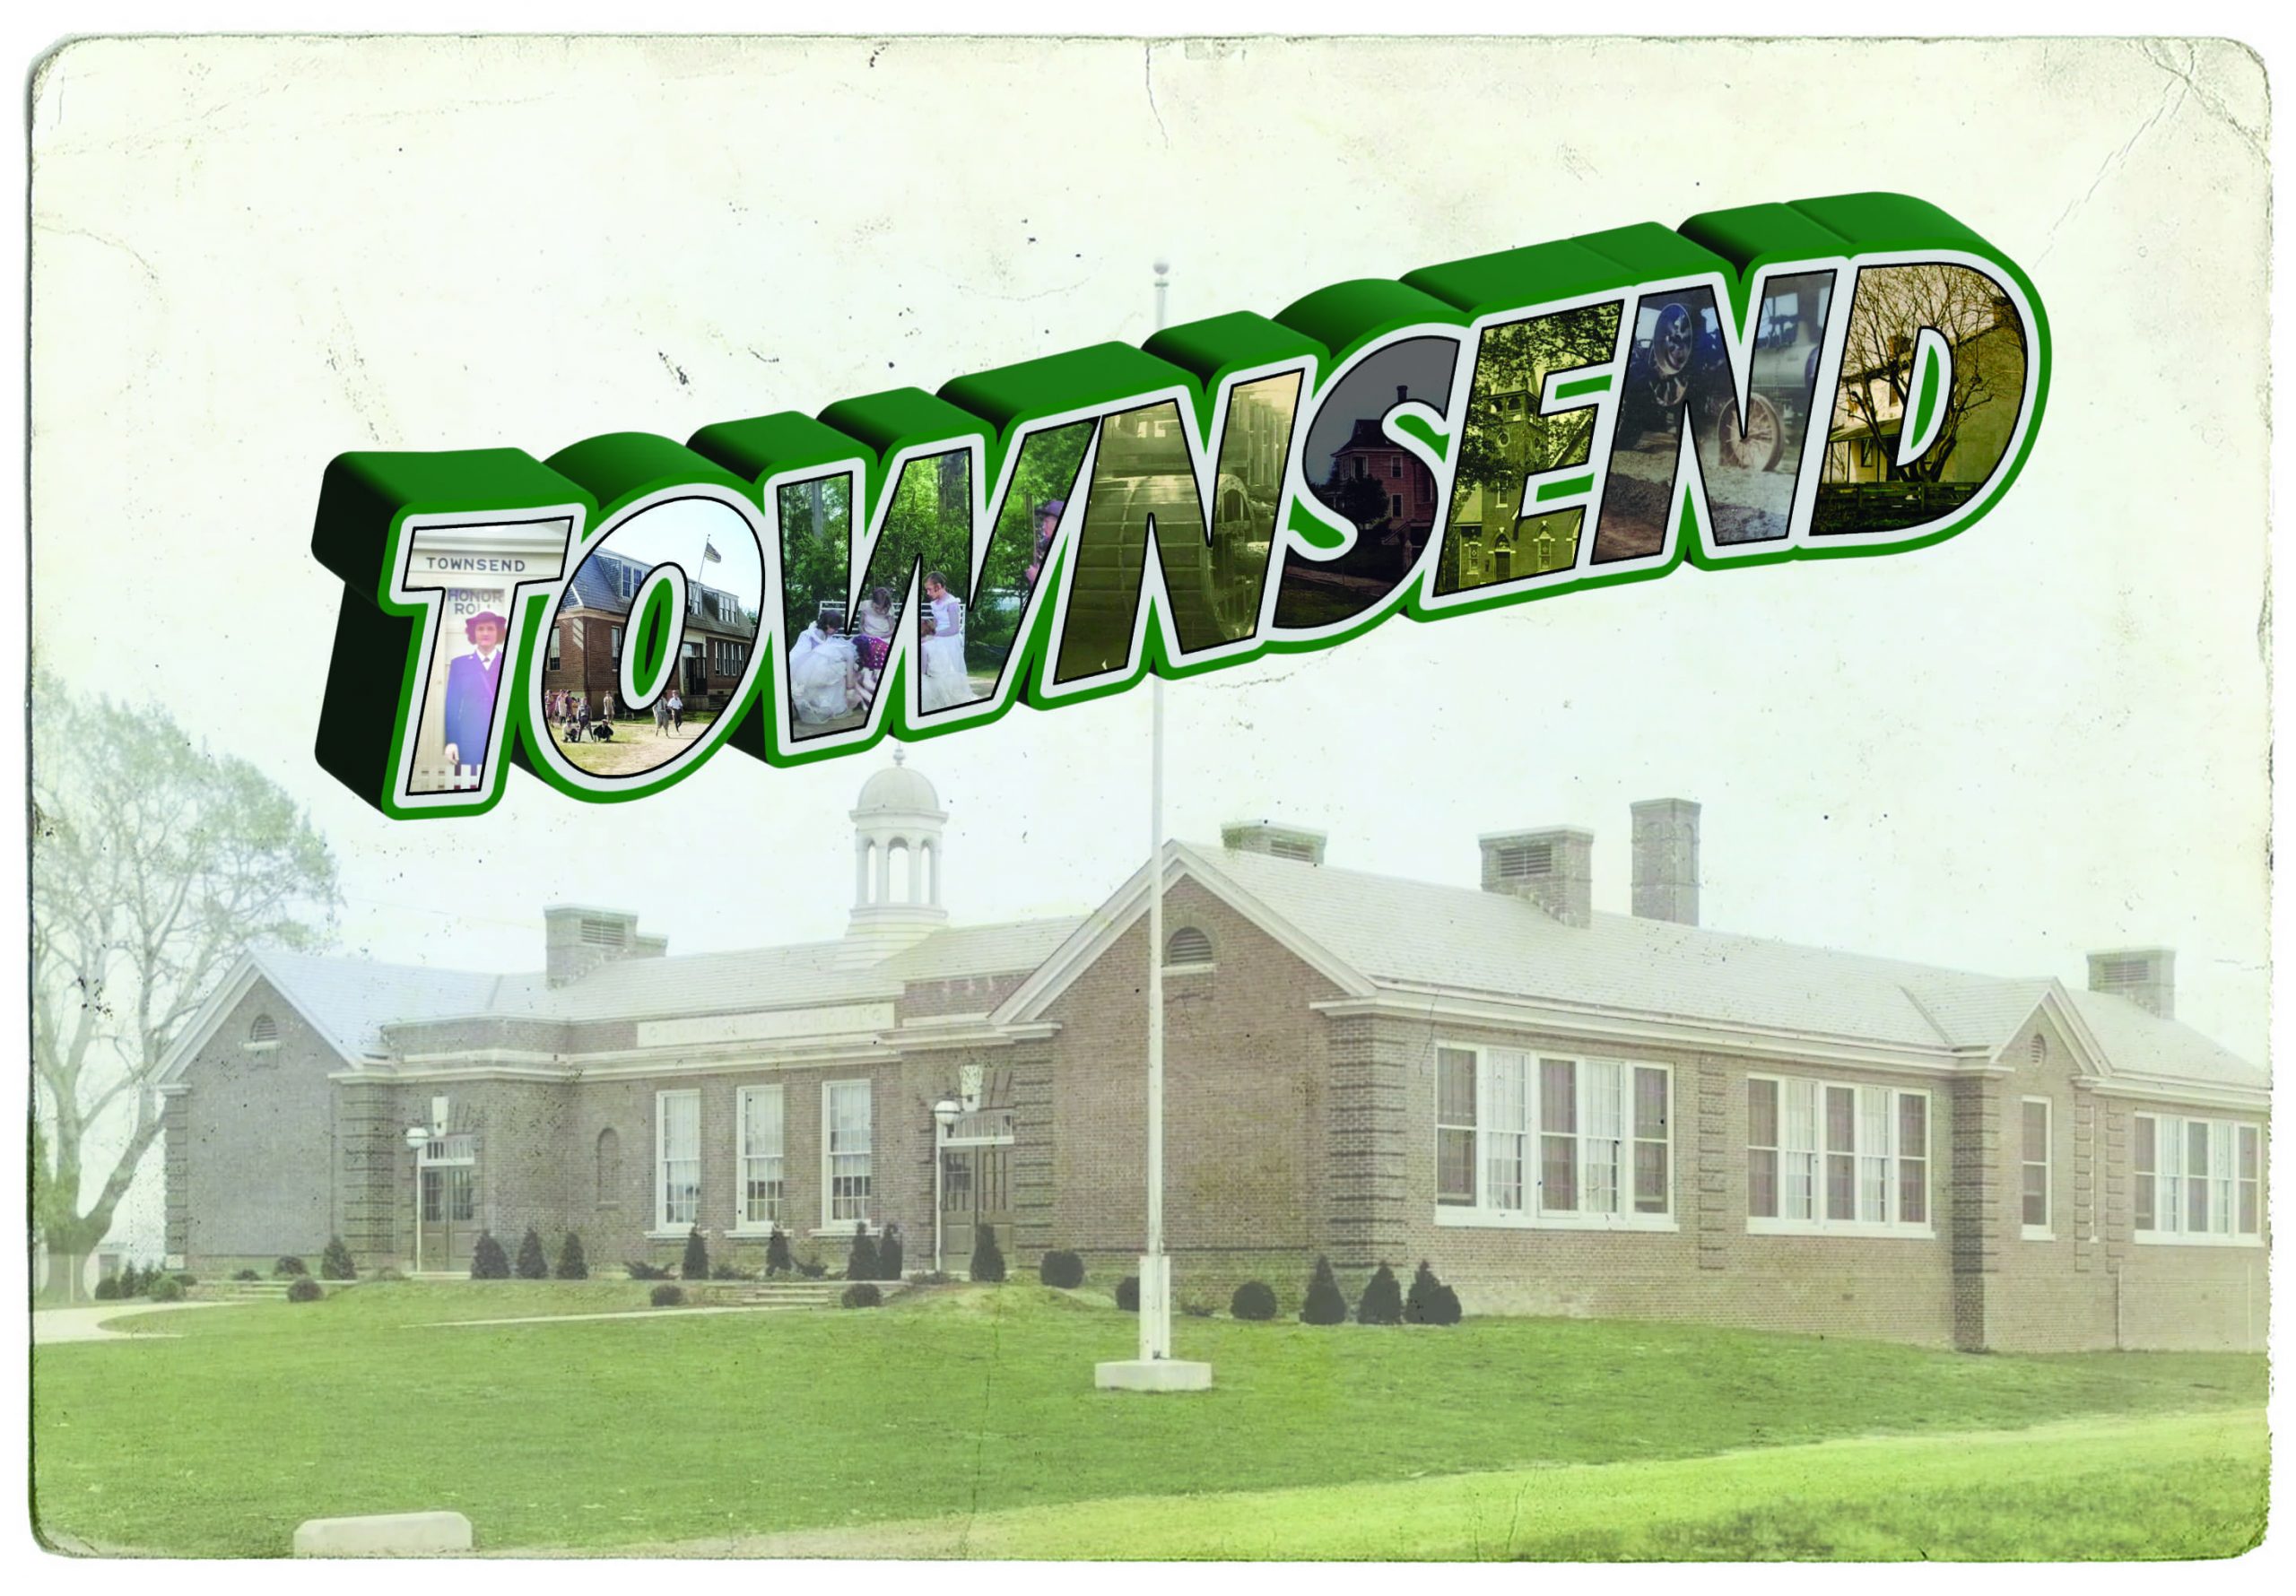 Click to learn more about this town